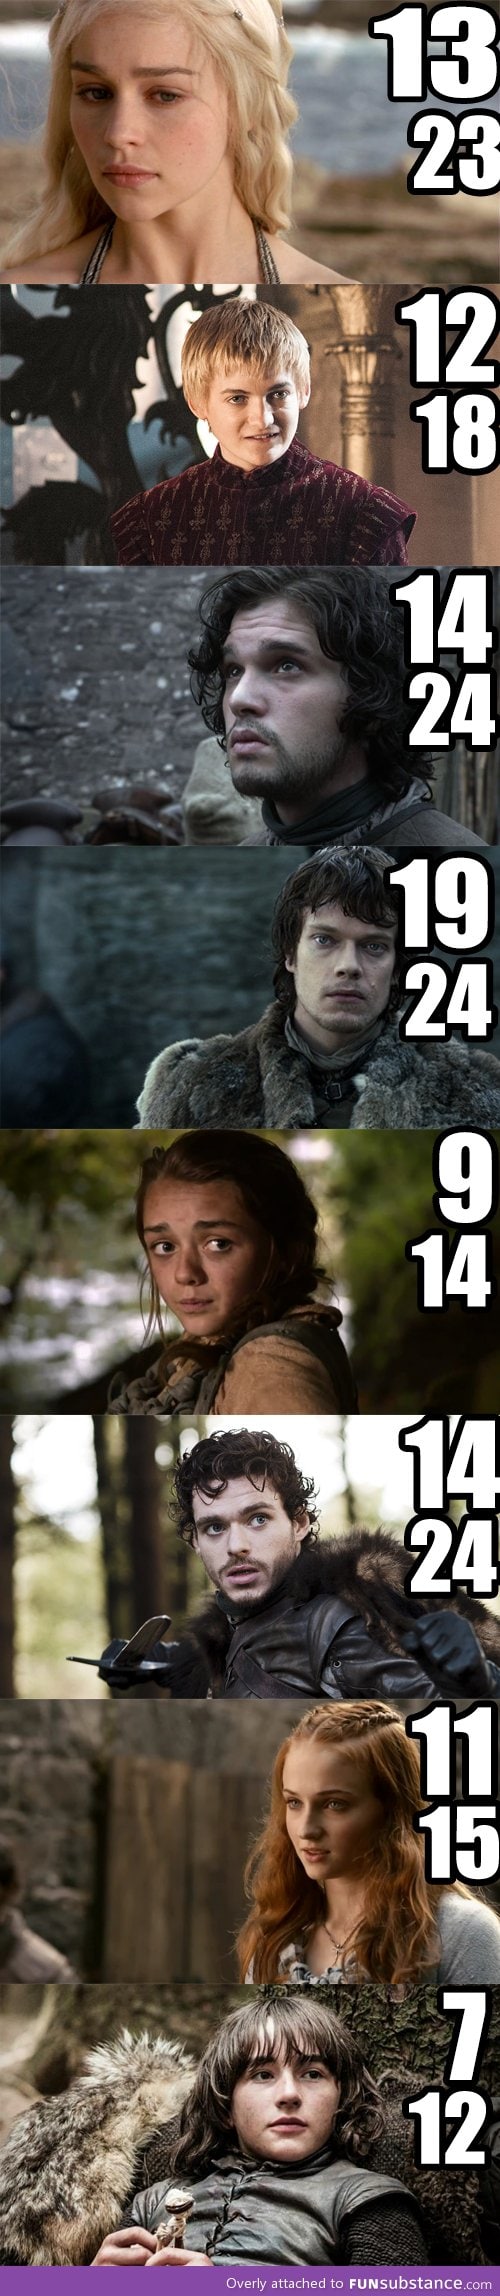 Character age vs actor age